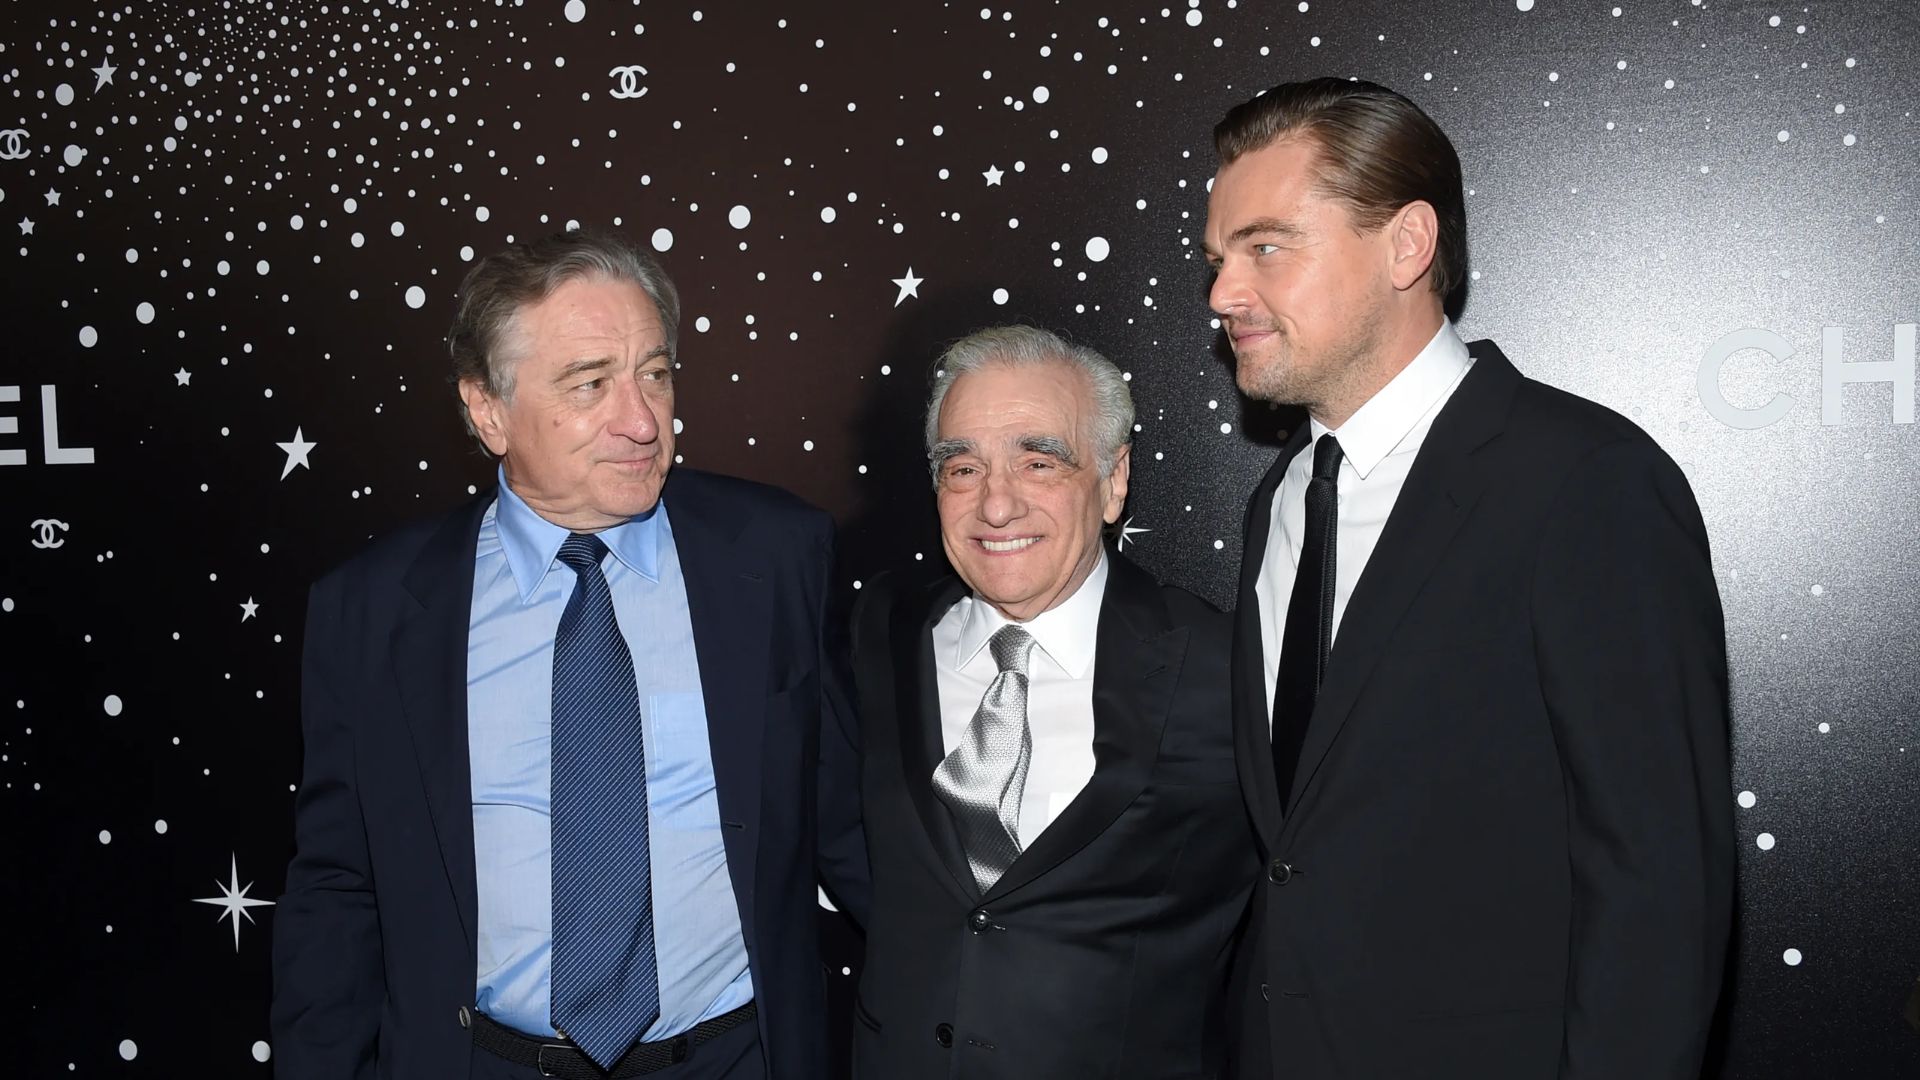 Martin Scorsese Establishes Different Communication Styles With De Niro And DiCaprio